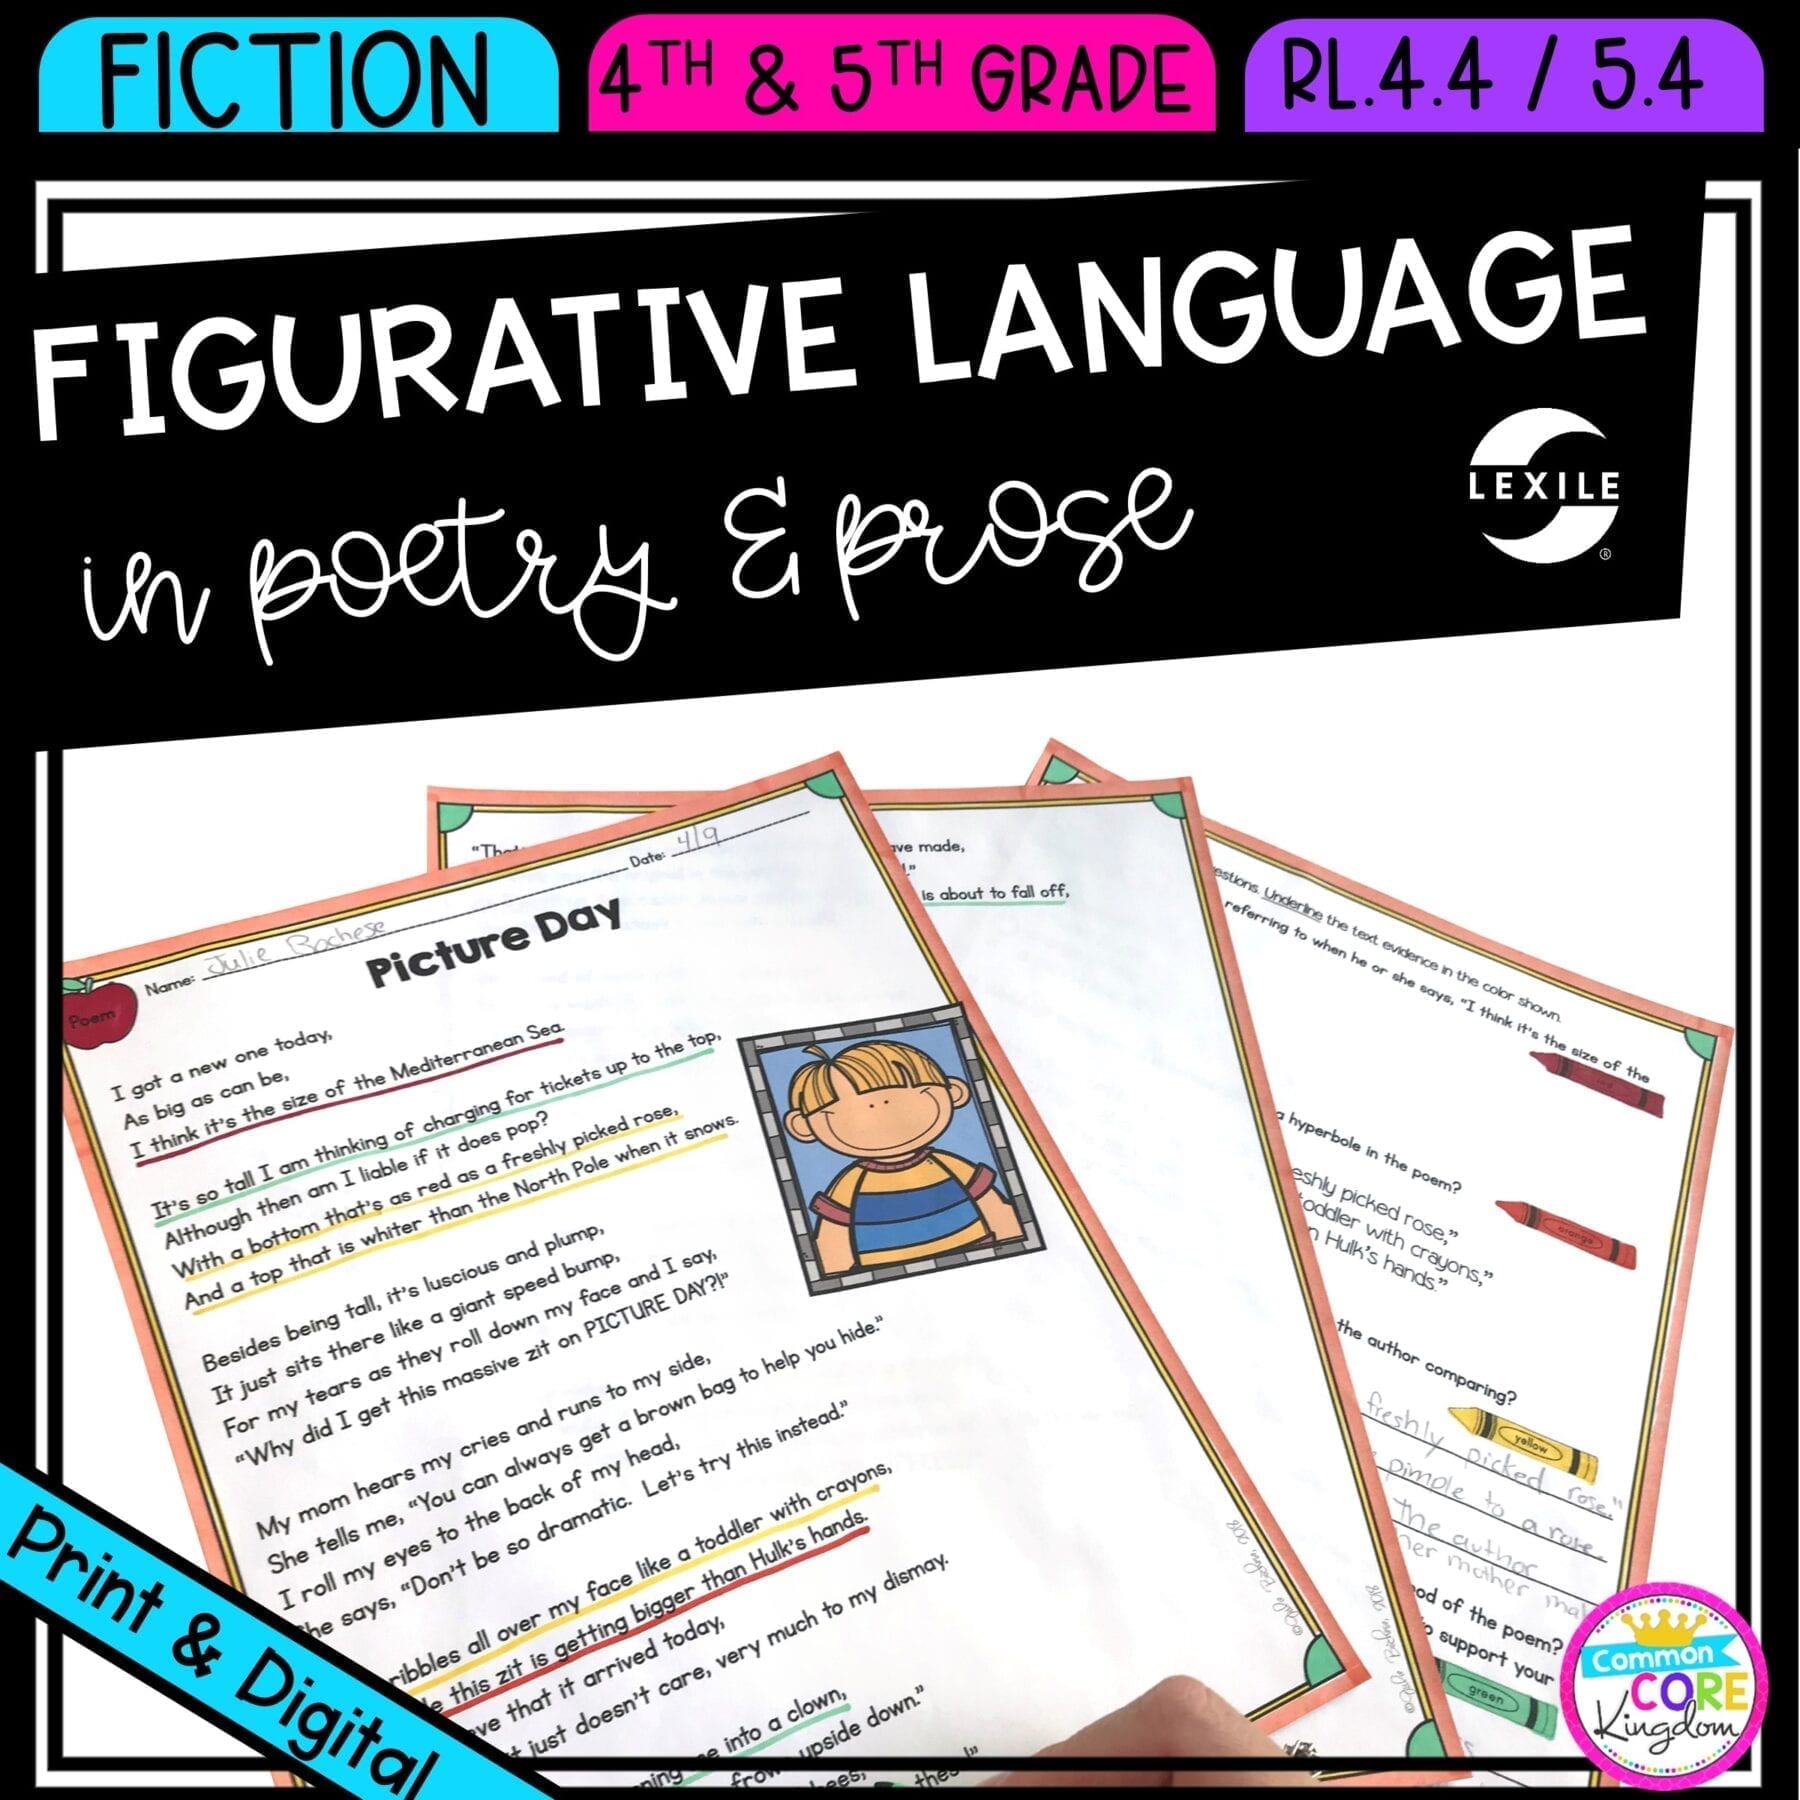 Figurative Language in Poetry and Prose for 4th & 5th grade cover showing printable and digital worksheets